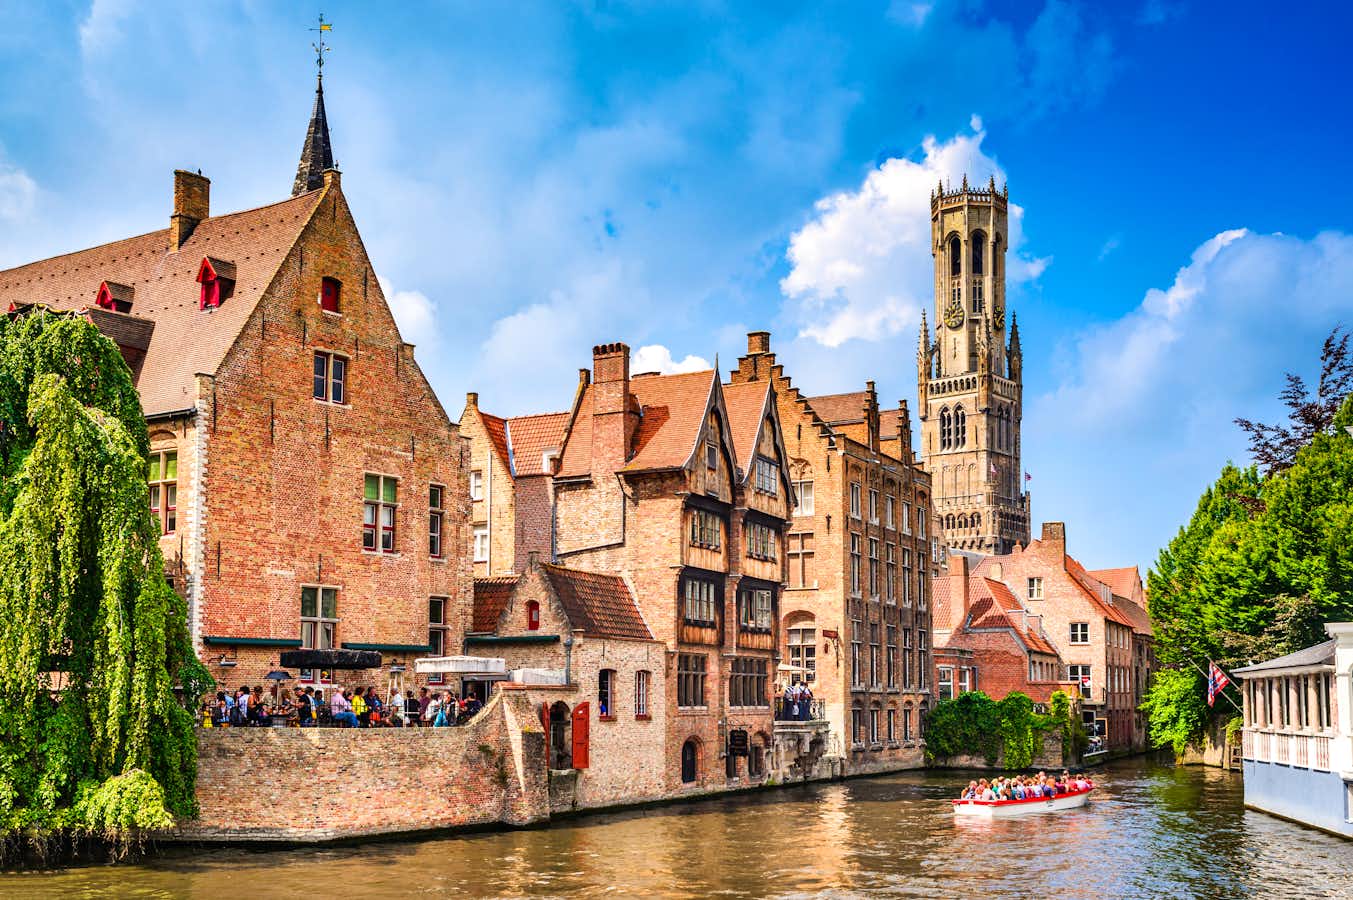 tourhub | Shearings | Bruges and Ghent 